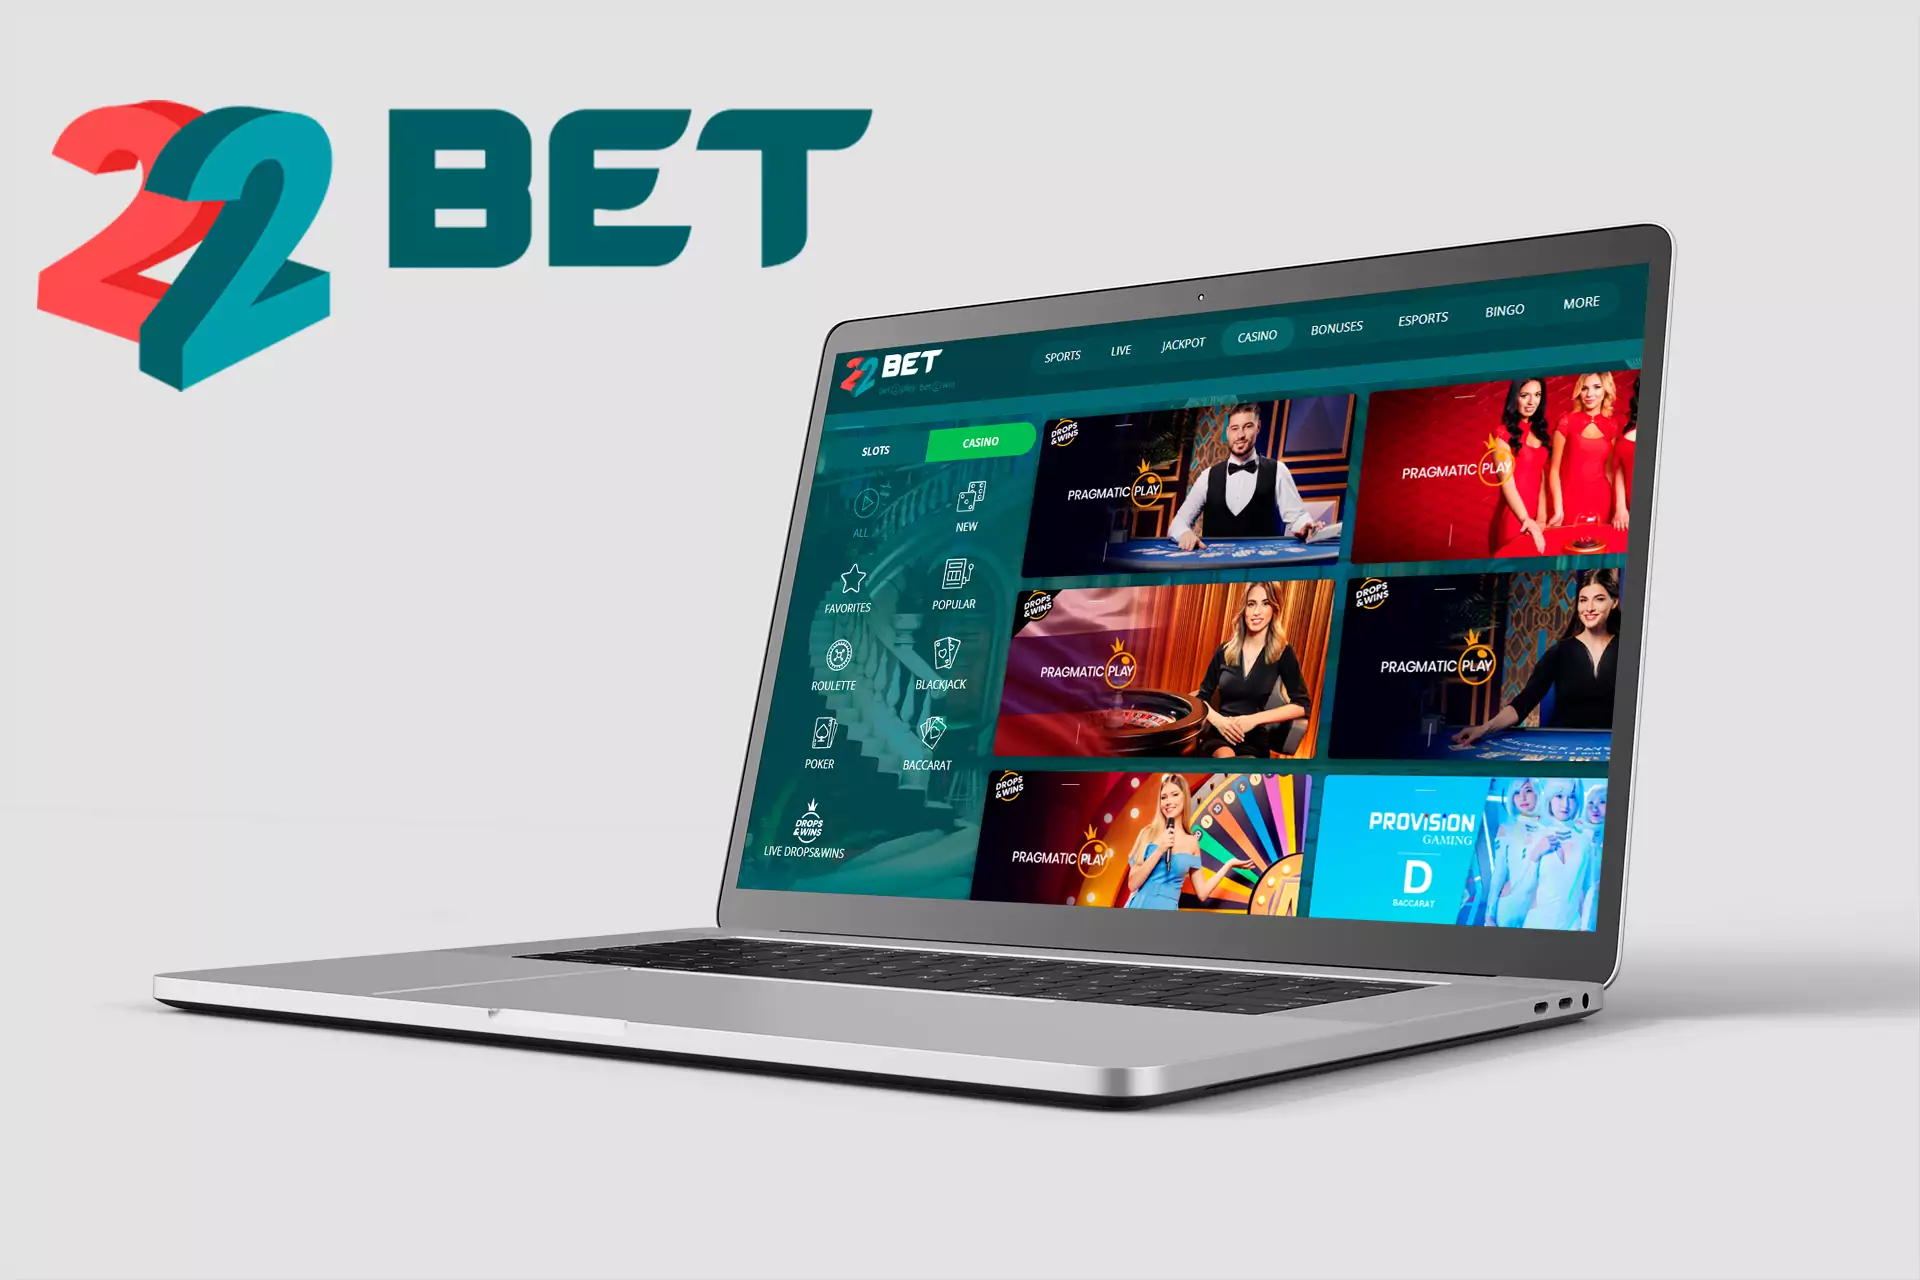 Sign up for 22Bet and get a welcome bonus.